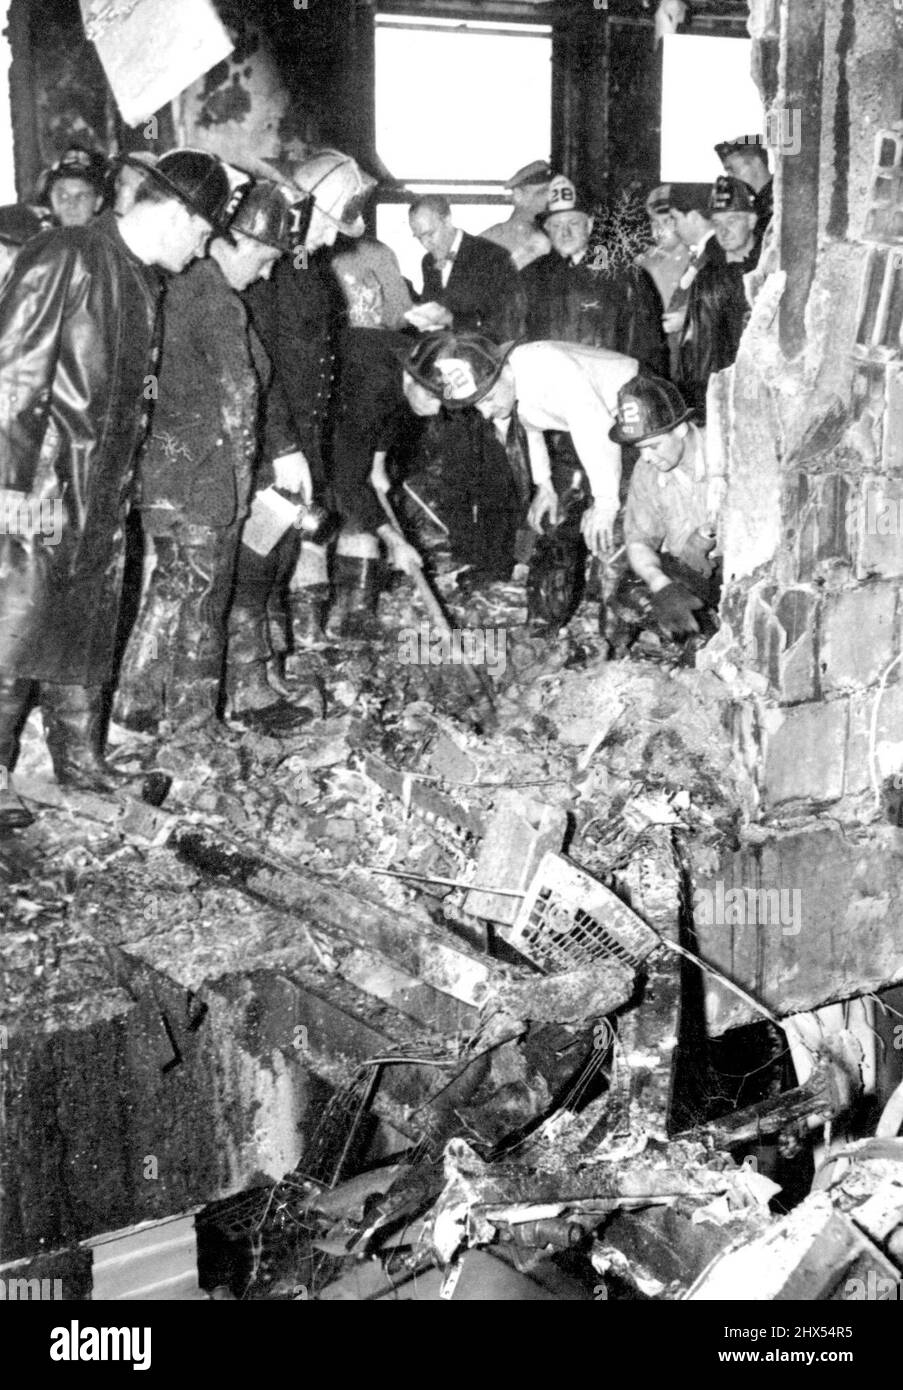 Search For Bodies Of Crash Victims -- Firemen dig through wreckage of the plane that crashed into the upper part of the Empire State Building in New York, July 28th, searching for bodies of victims of the crash. This scene is on the 79th floor, looking through the elevator shaft into an office. Hote at upper left was made by the plane. July 28, 1945. (Photo by Associated Press Photo). Stock Photo